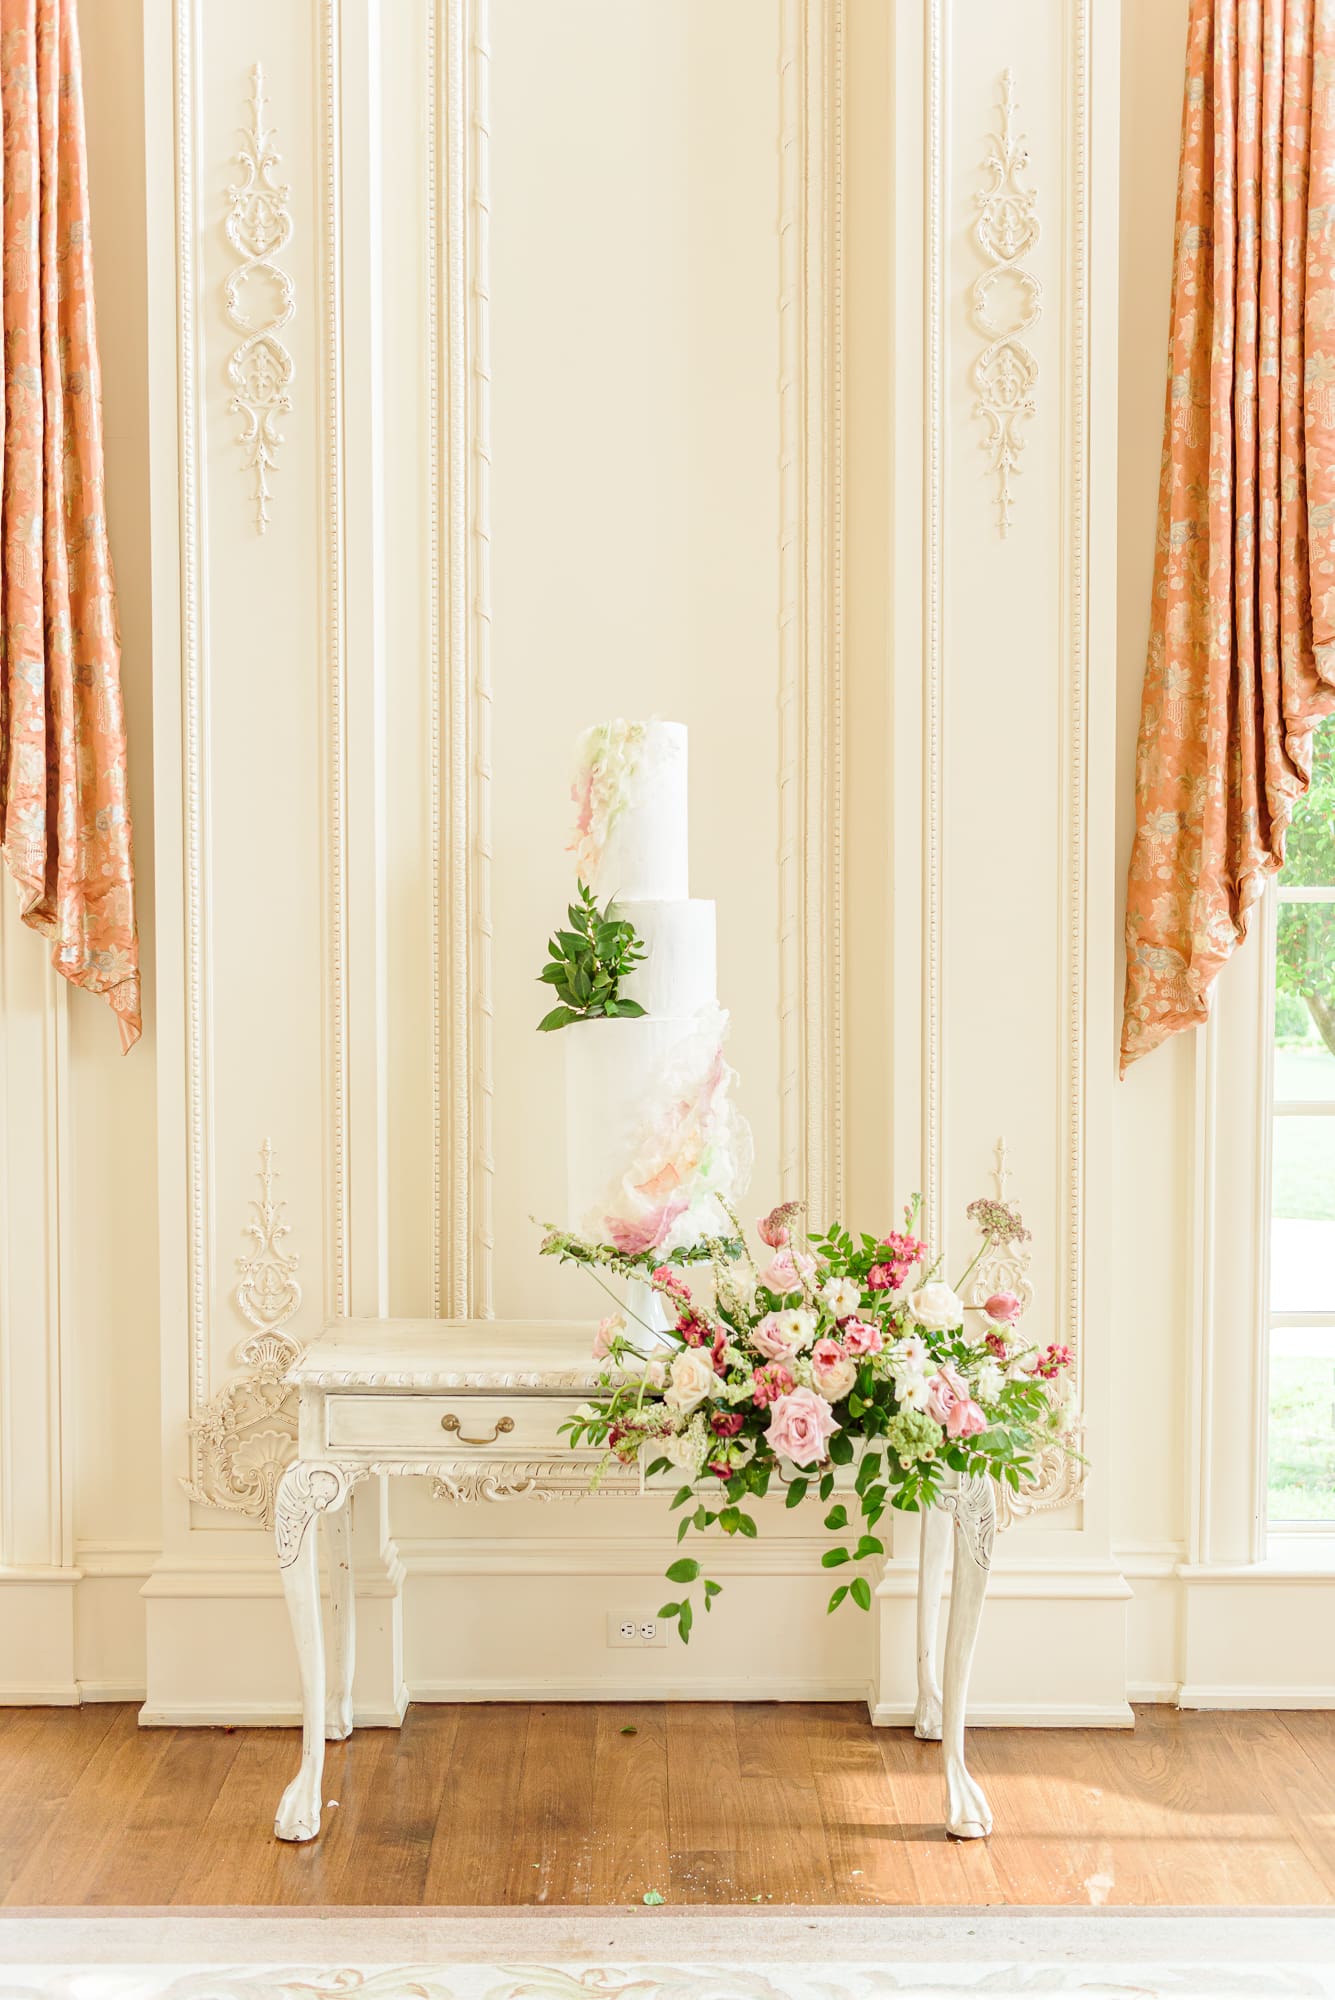 A tall, tiered cake stands on top of a desk overflowing with flowers at this elegant mansion wedding.